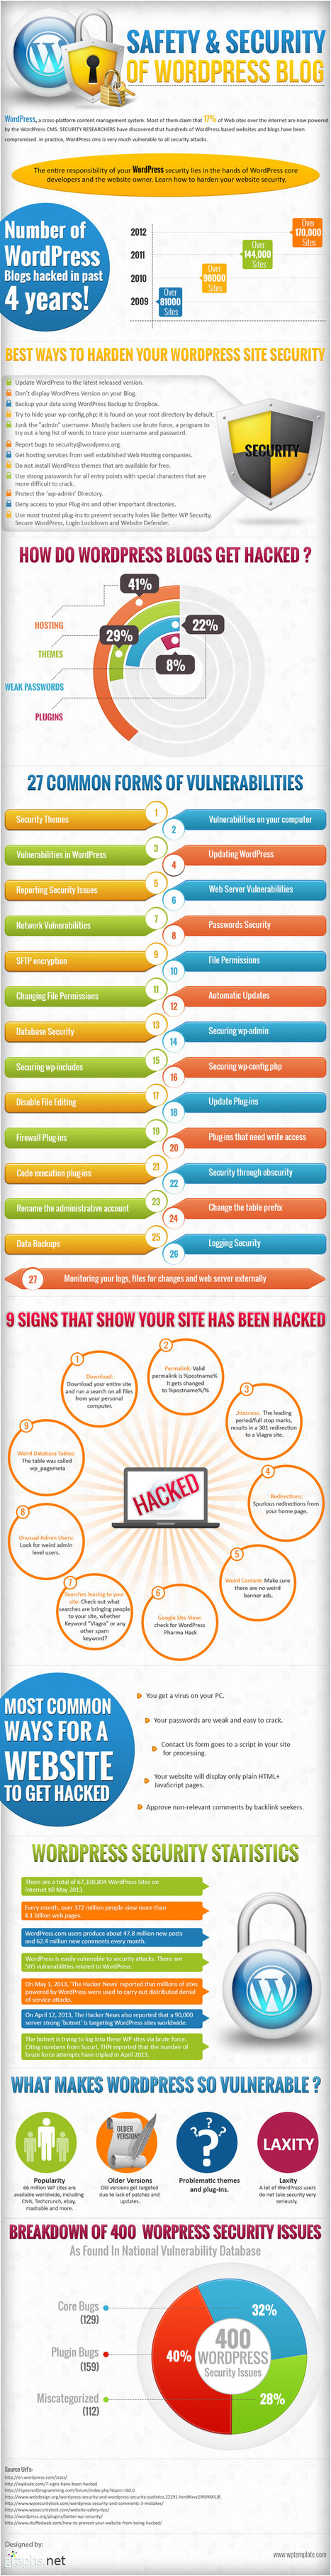 Safety and Security of WordPress Blog (Infographic) | Latest Social Media News | Scoop.it